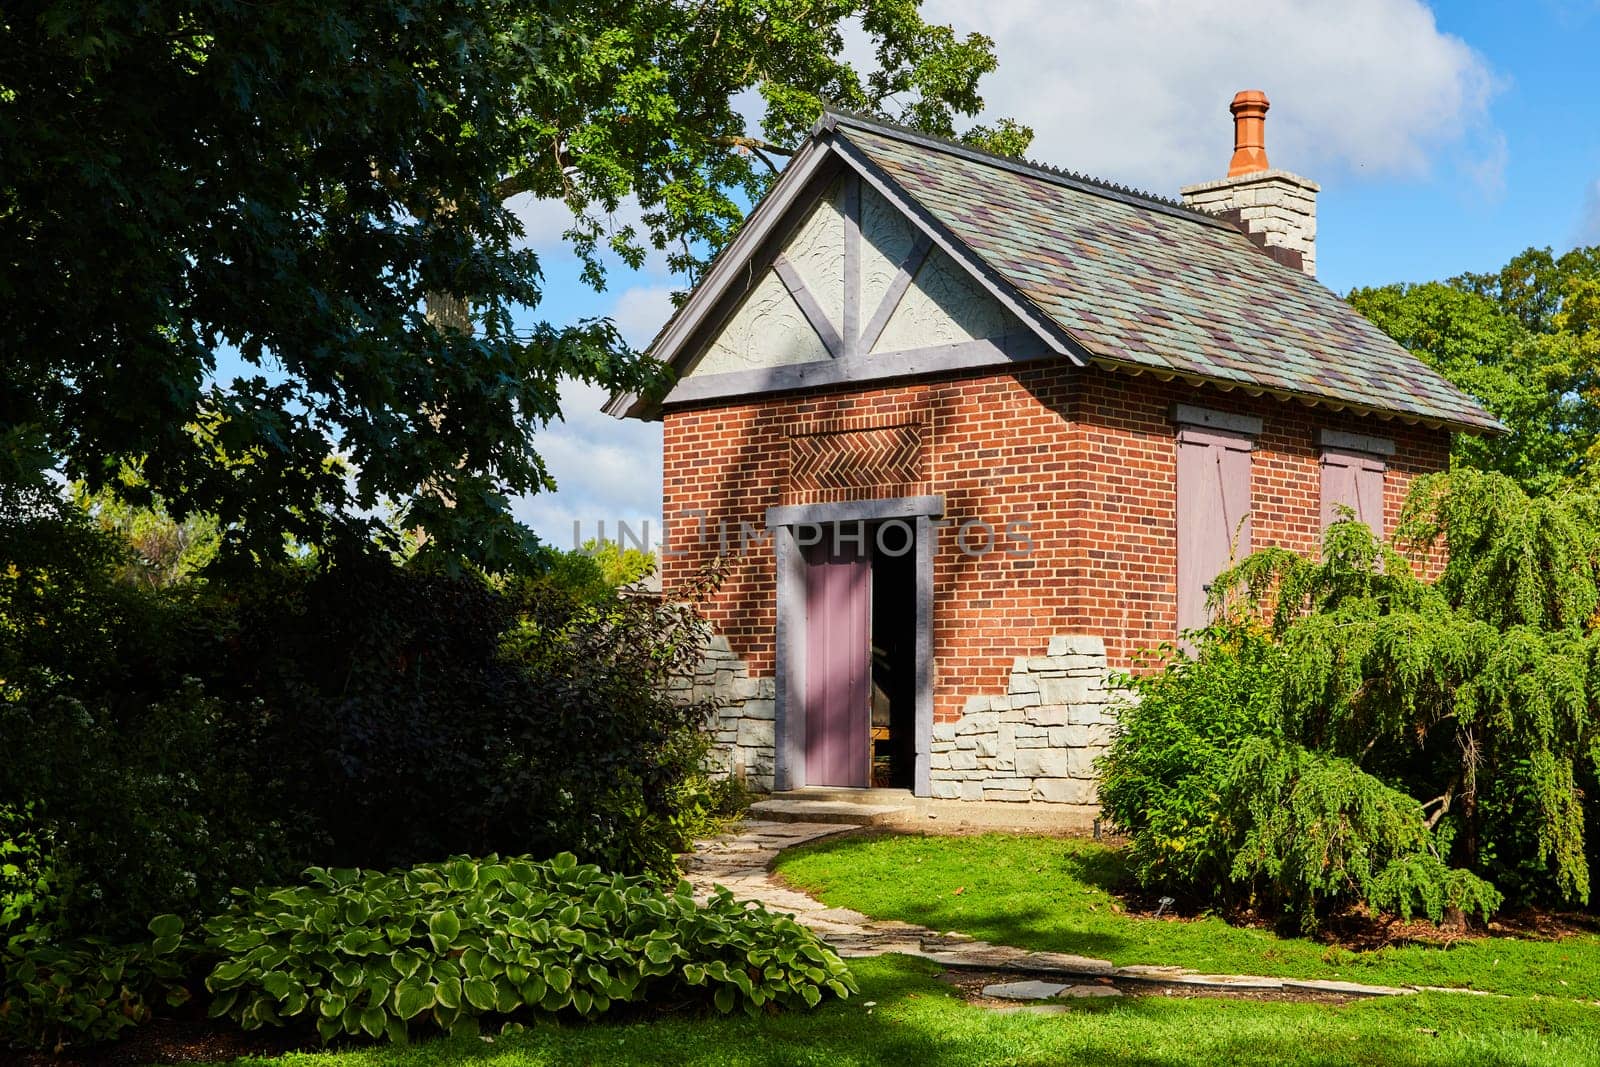 Charming brick cottage amid lush Botanic Gardens in Elkhart, Indiana, 2023, featuring a rustic stone chimney and inviting purple door